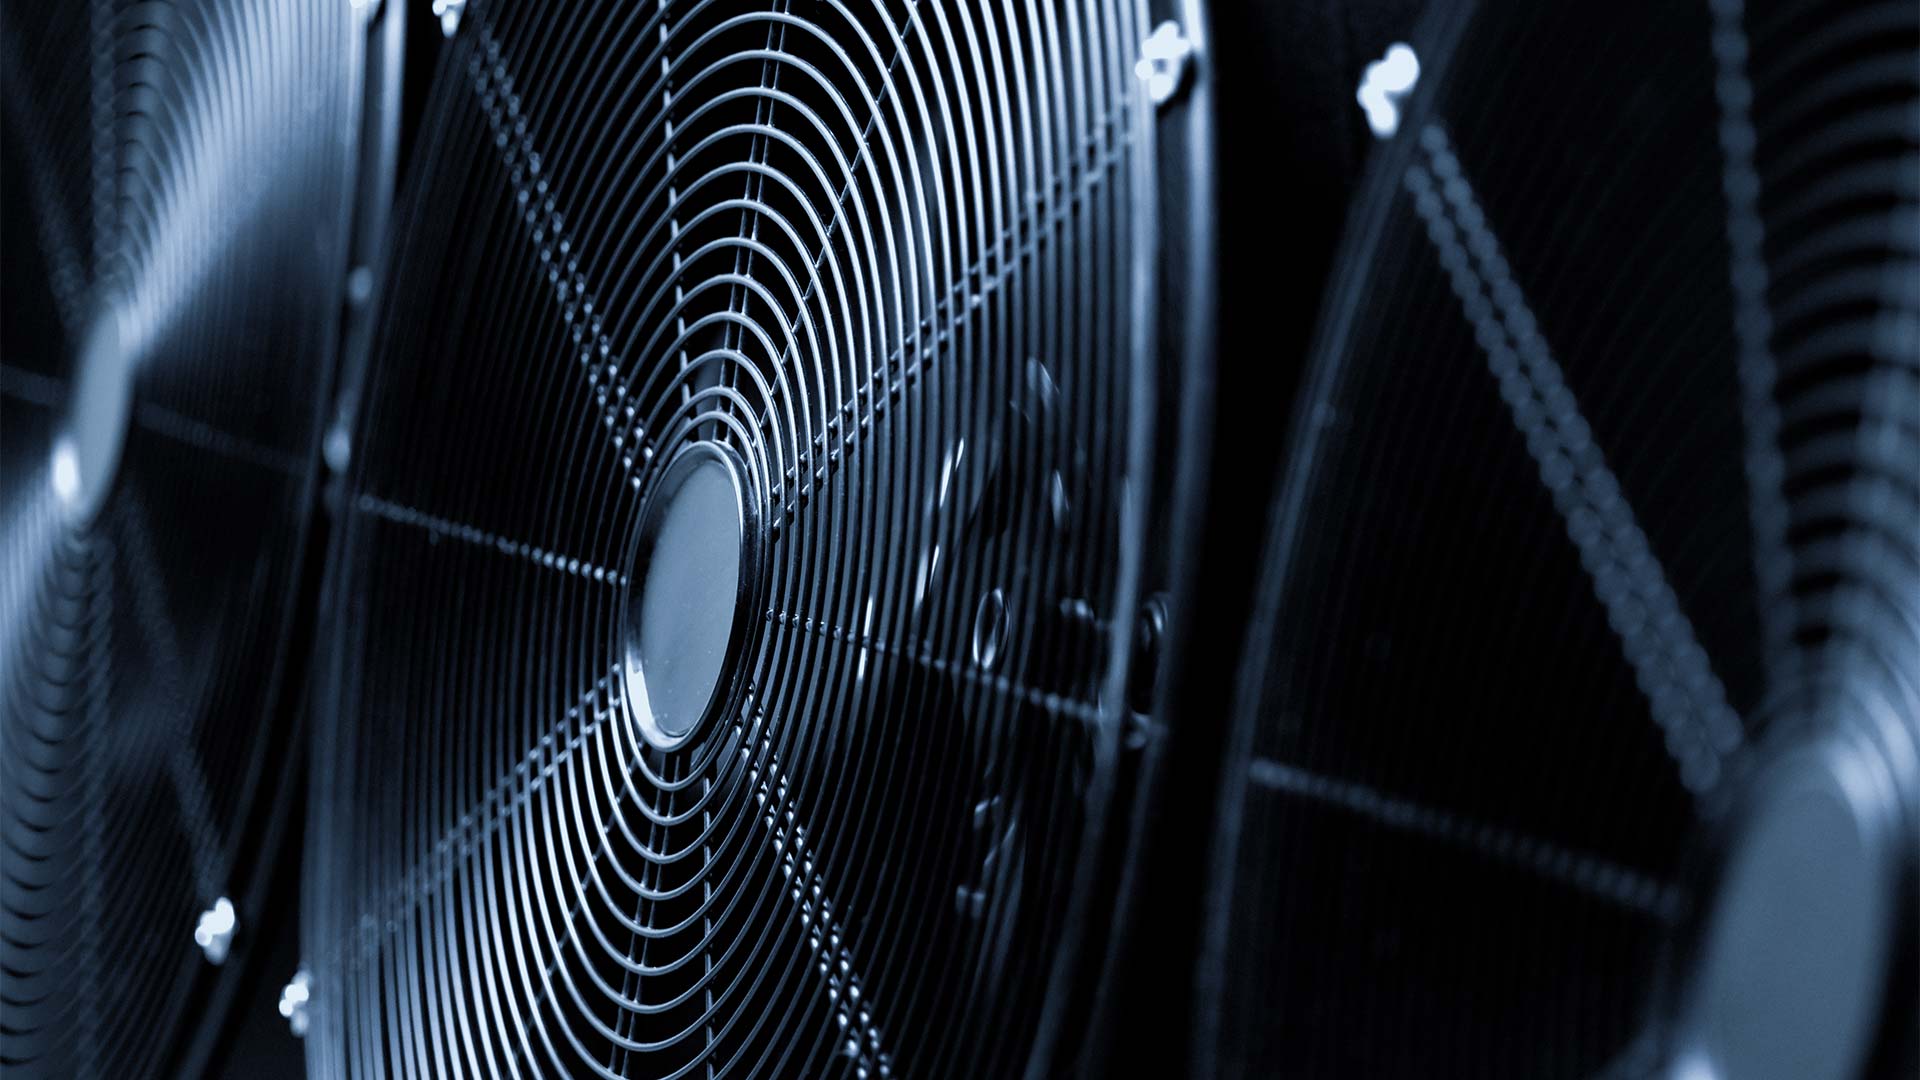 Fans for customer-specific applications and requirements